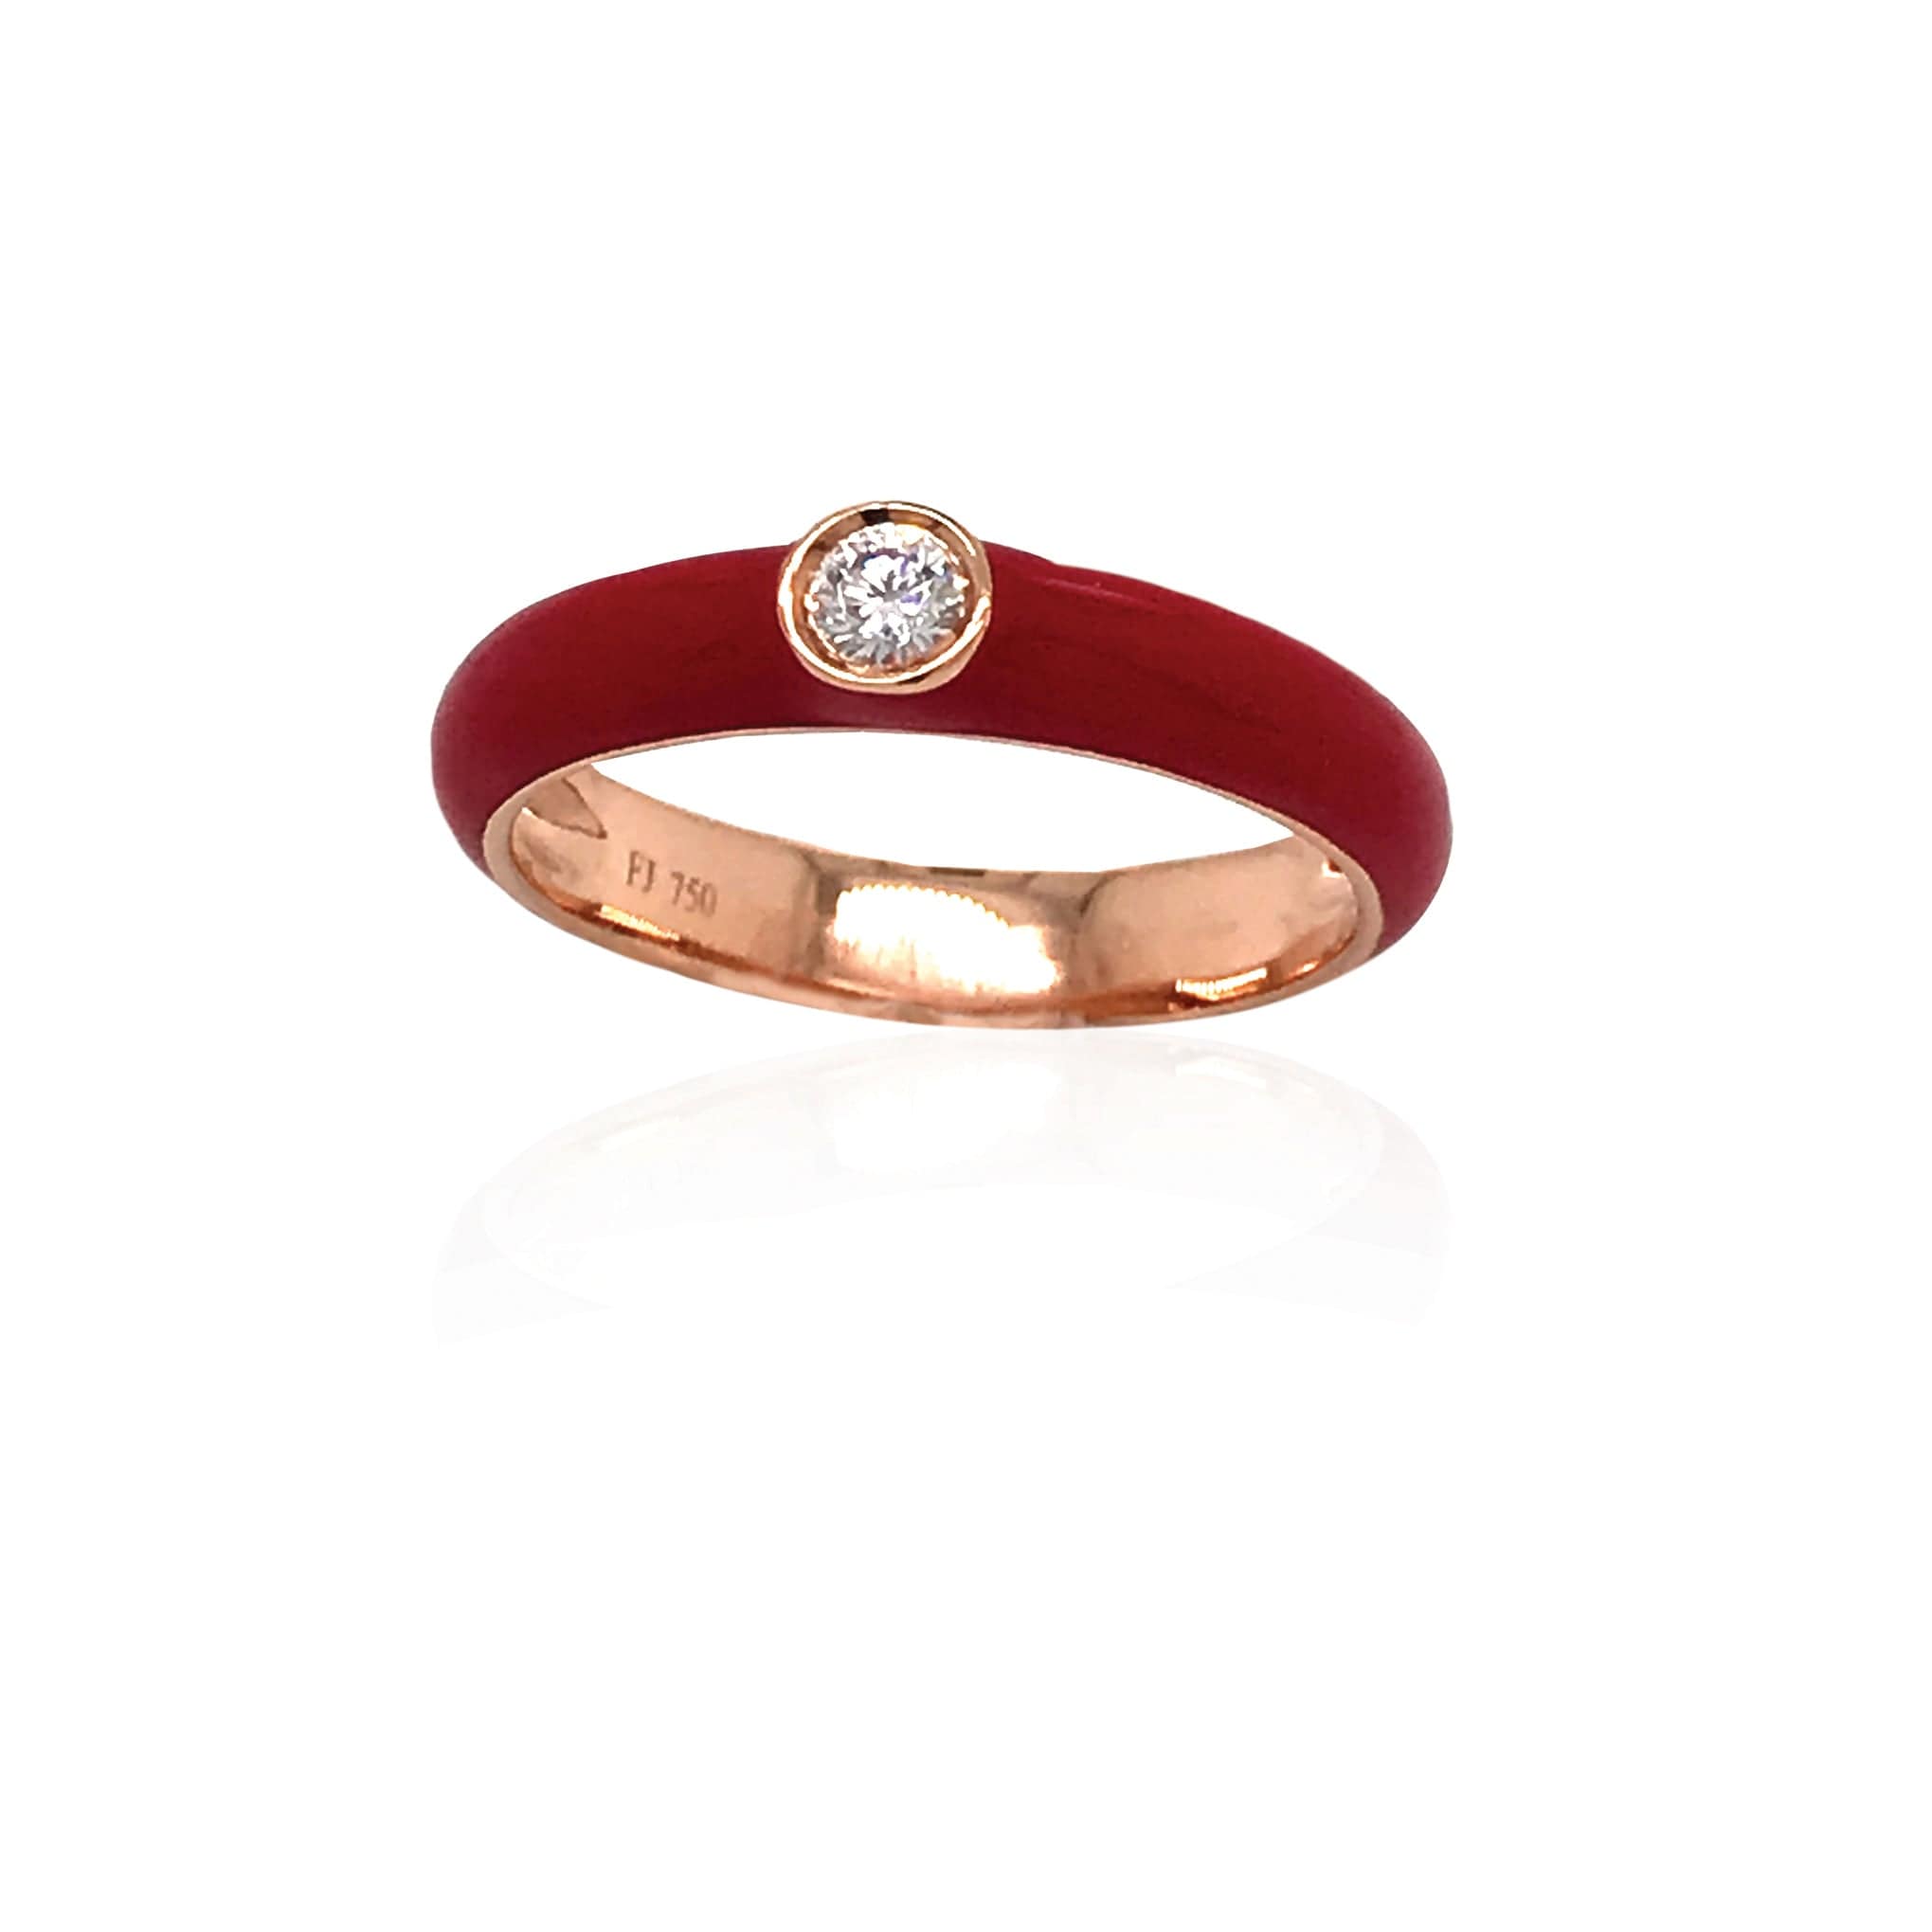 M.Fitaihi Candy - Gold Red Ring With Diamond - M.Fitaihi